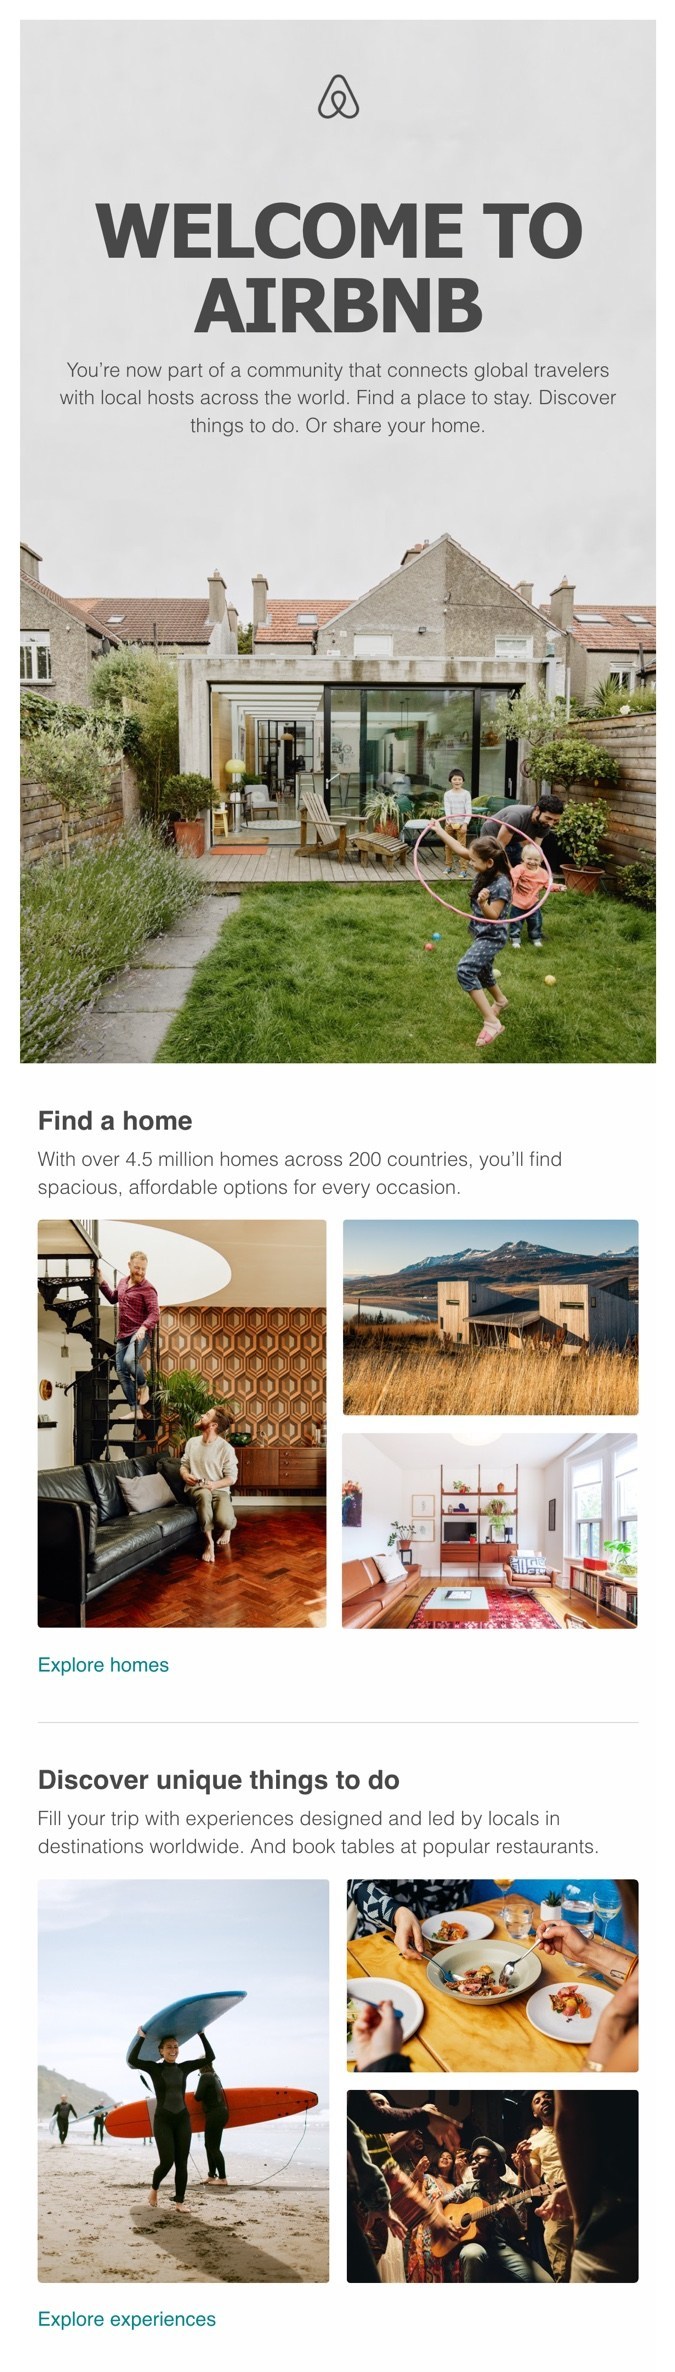 Airbnb email example - How to use a welcome email to engage your subscribers